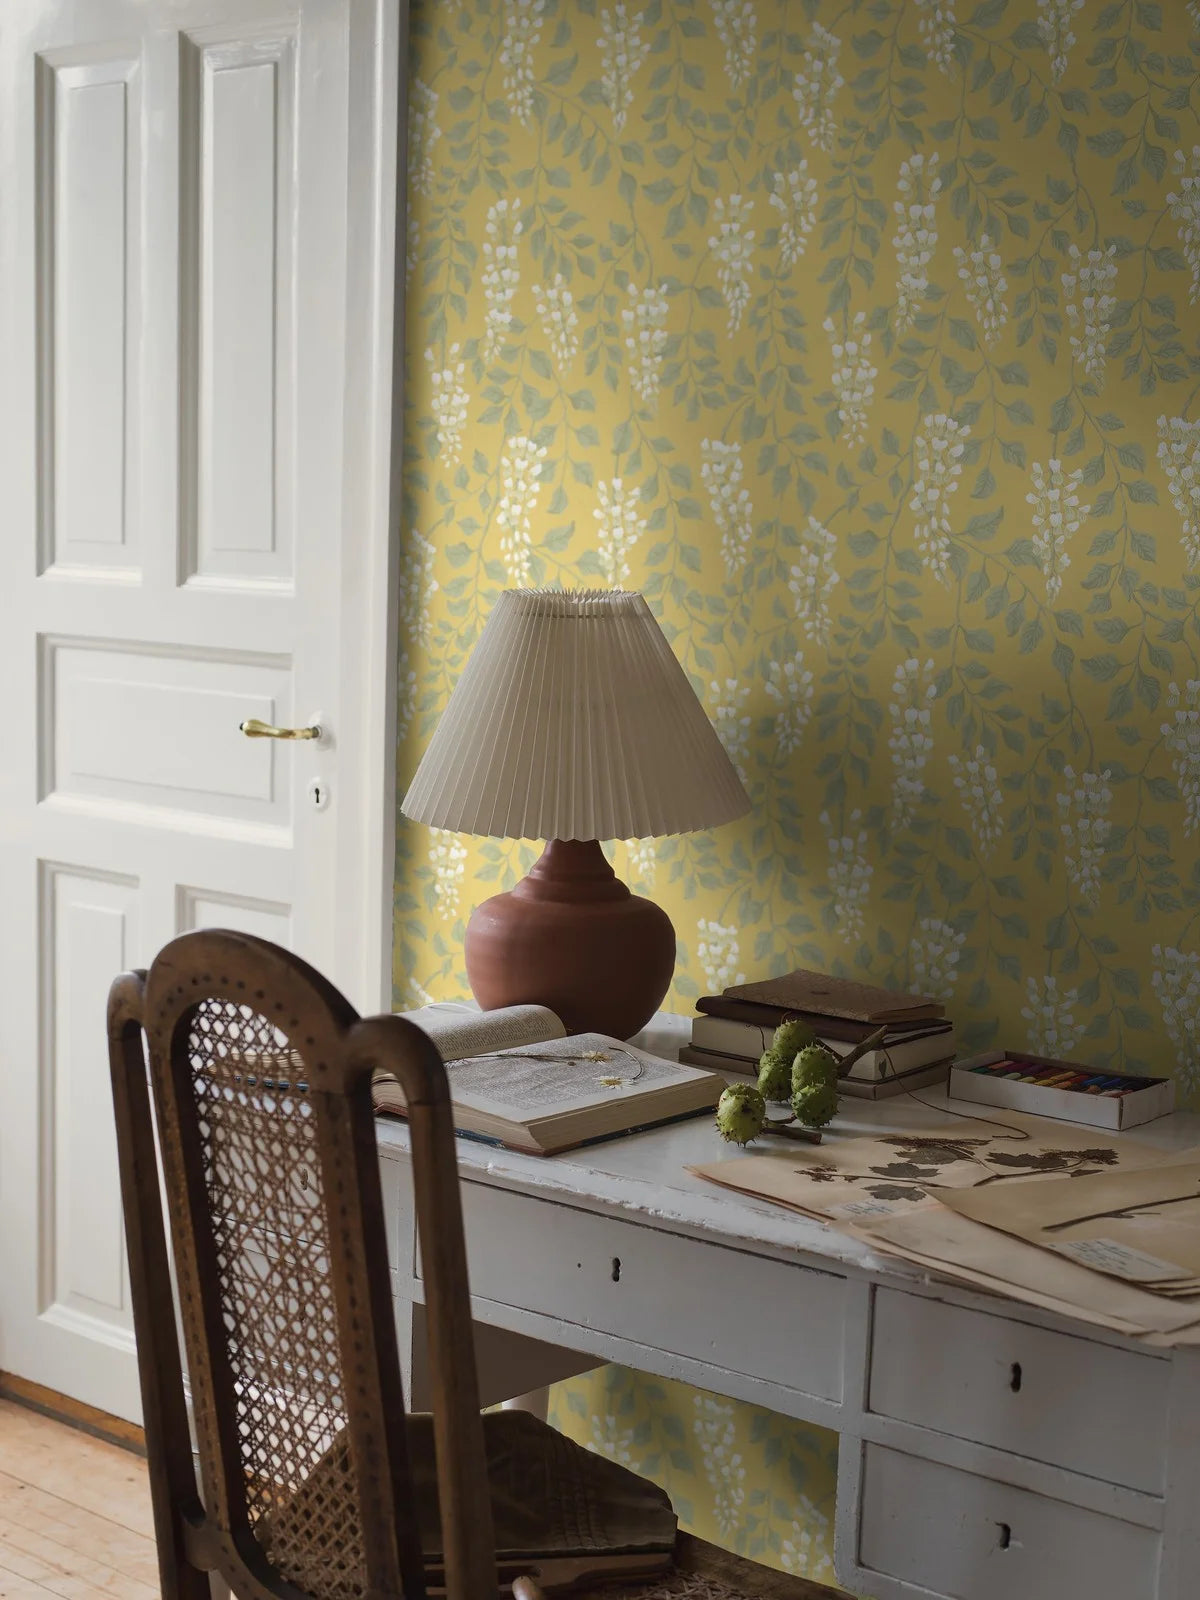 Infuse energy and positivity into your space with our Blåregn wallpaper set on a sunny and hopeful yellow background. 